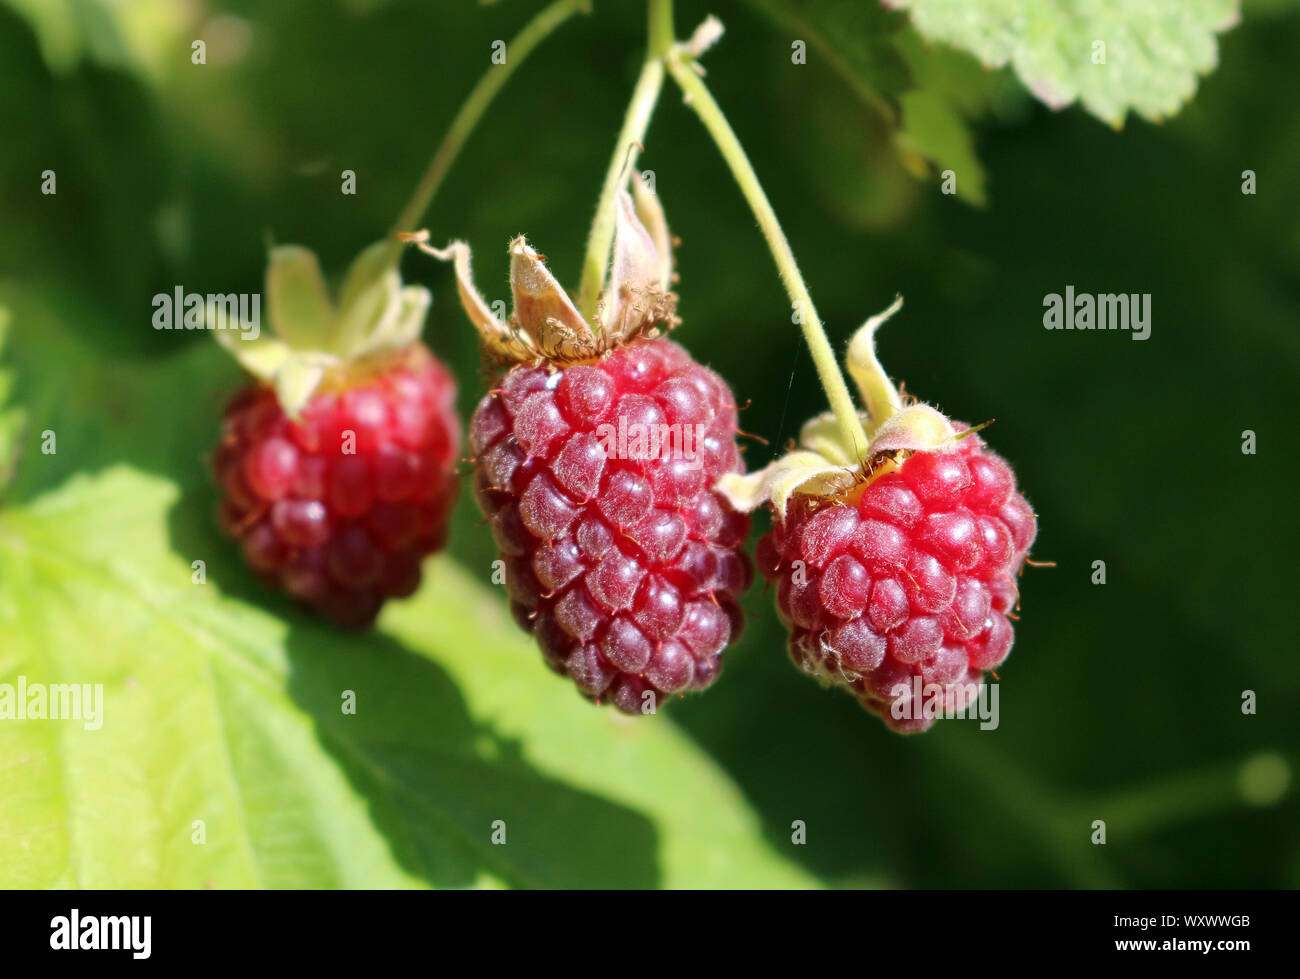 Loganberry. A group of loganberries ripening on a plant Stock Photo